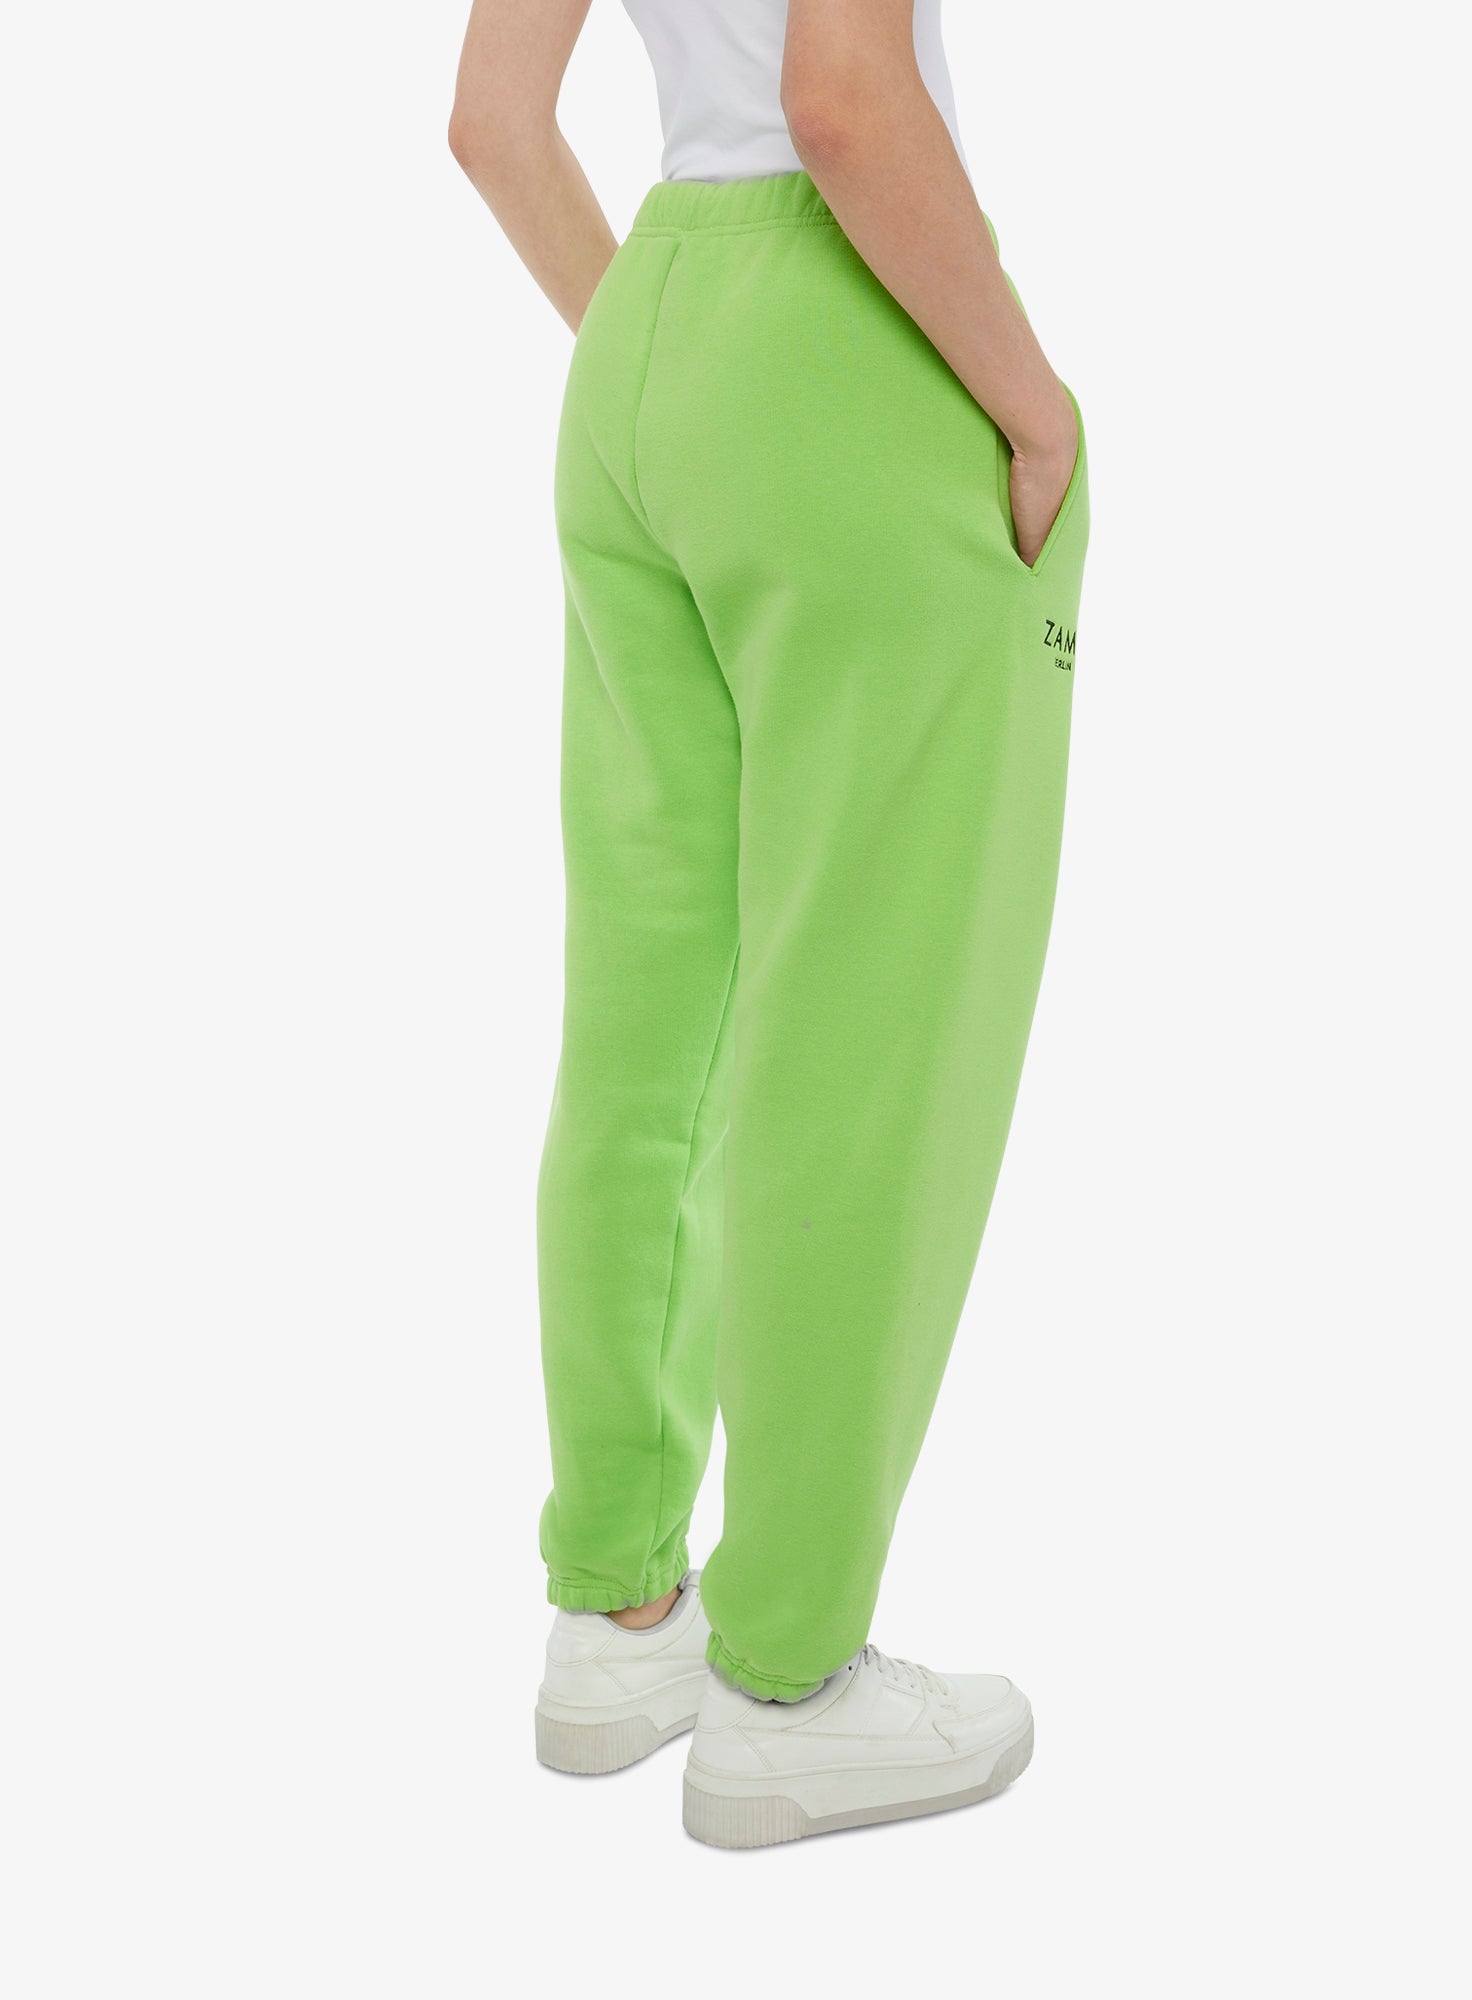 FAVORITE_03_SWEATPANTS_LIME_Designed_in_Berlin_Made_to_last_Handmade_in_Poland.